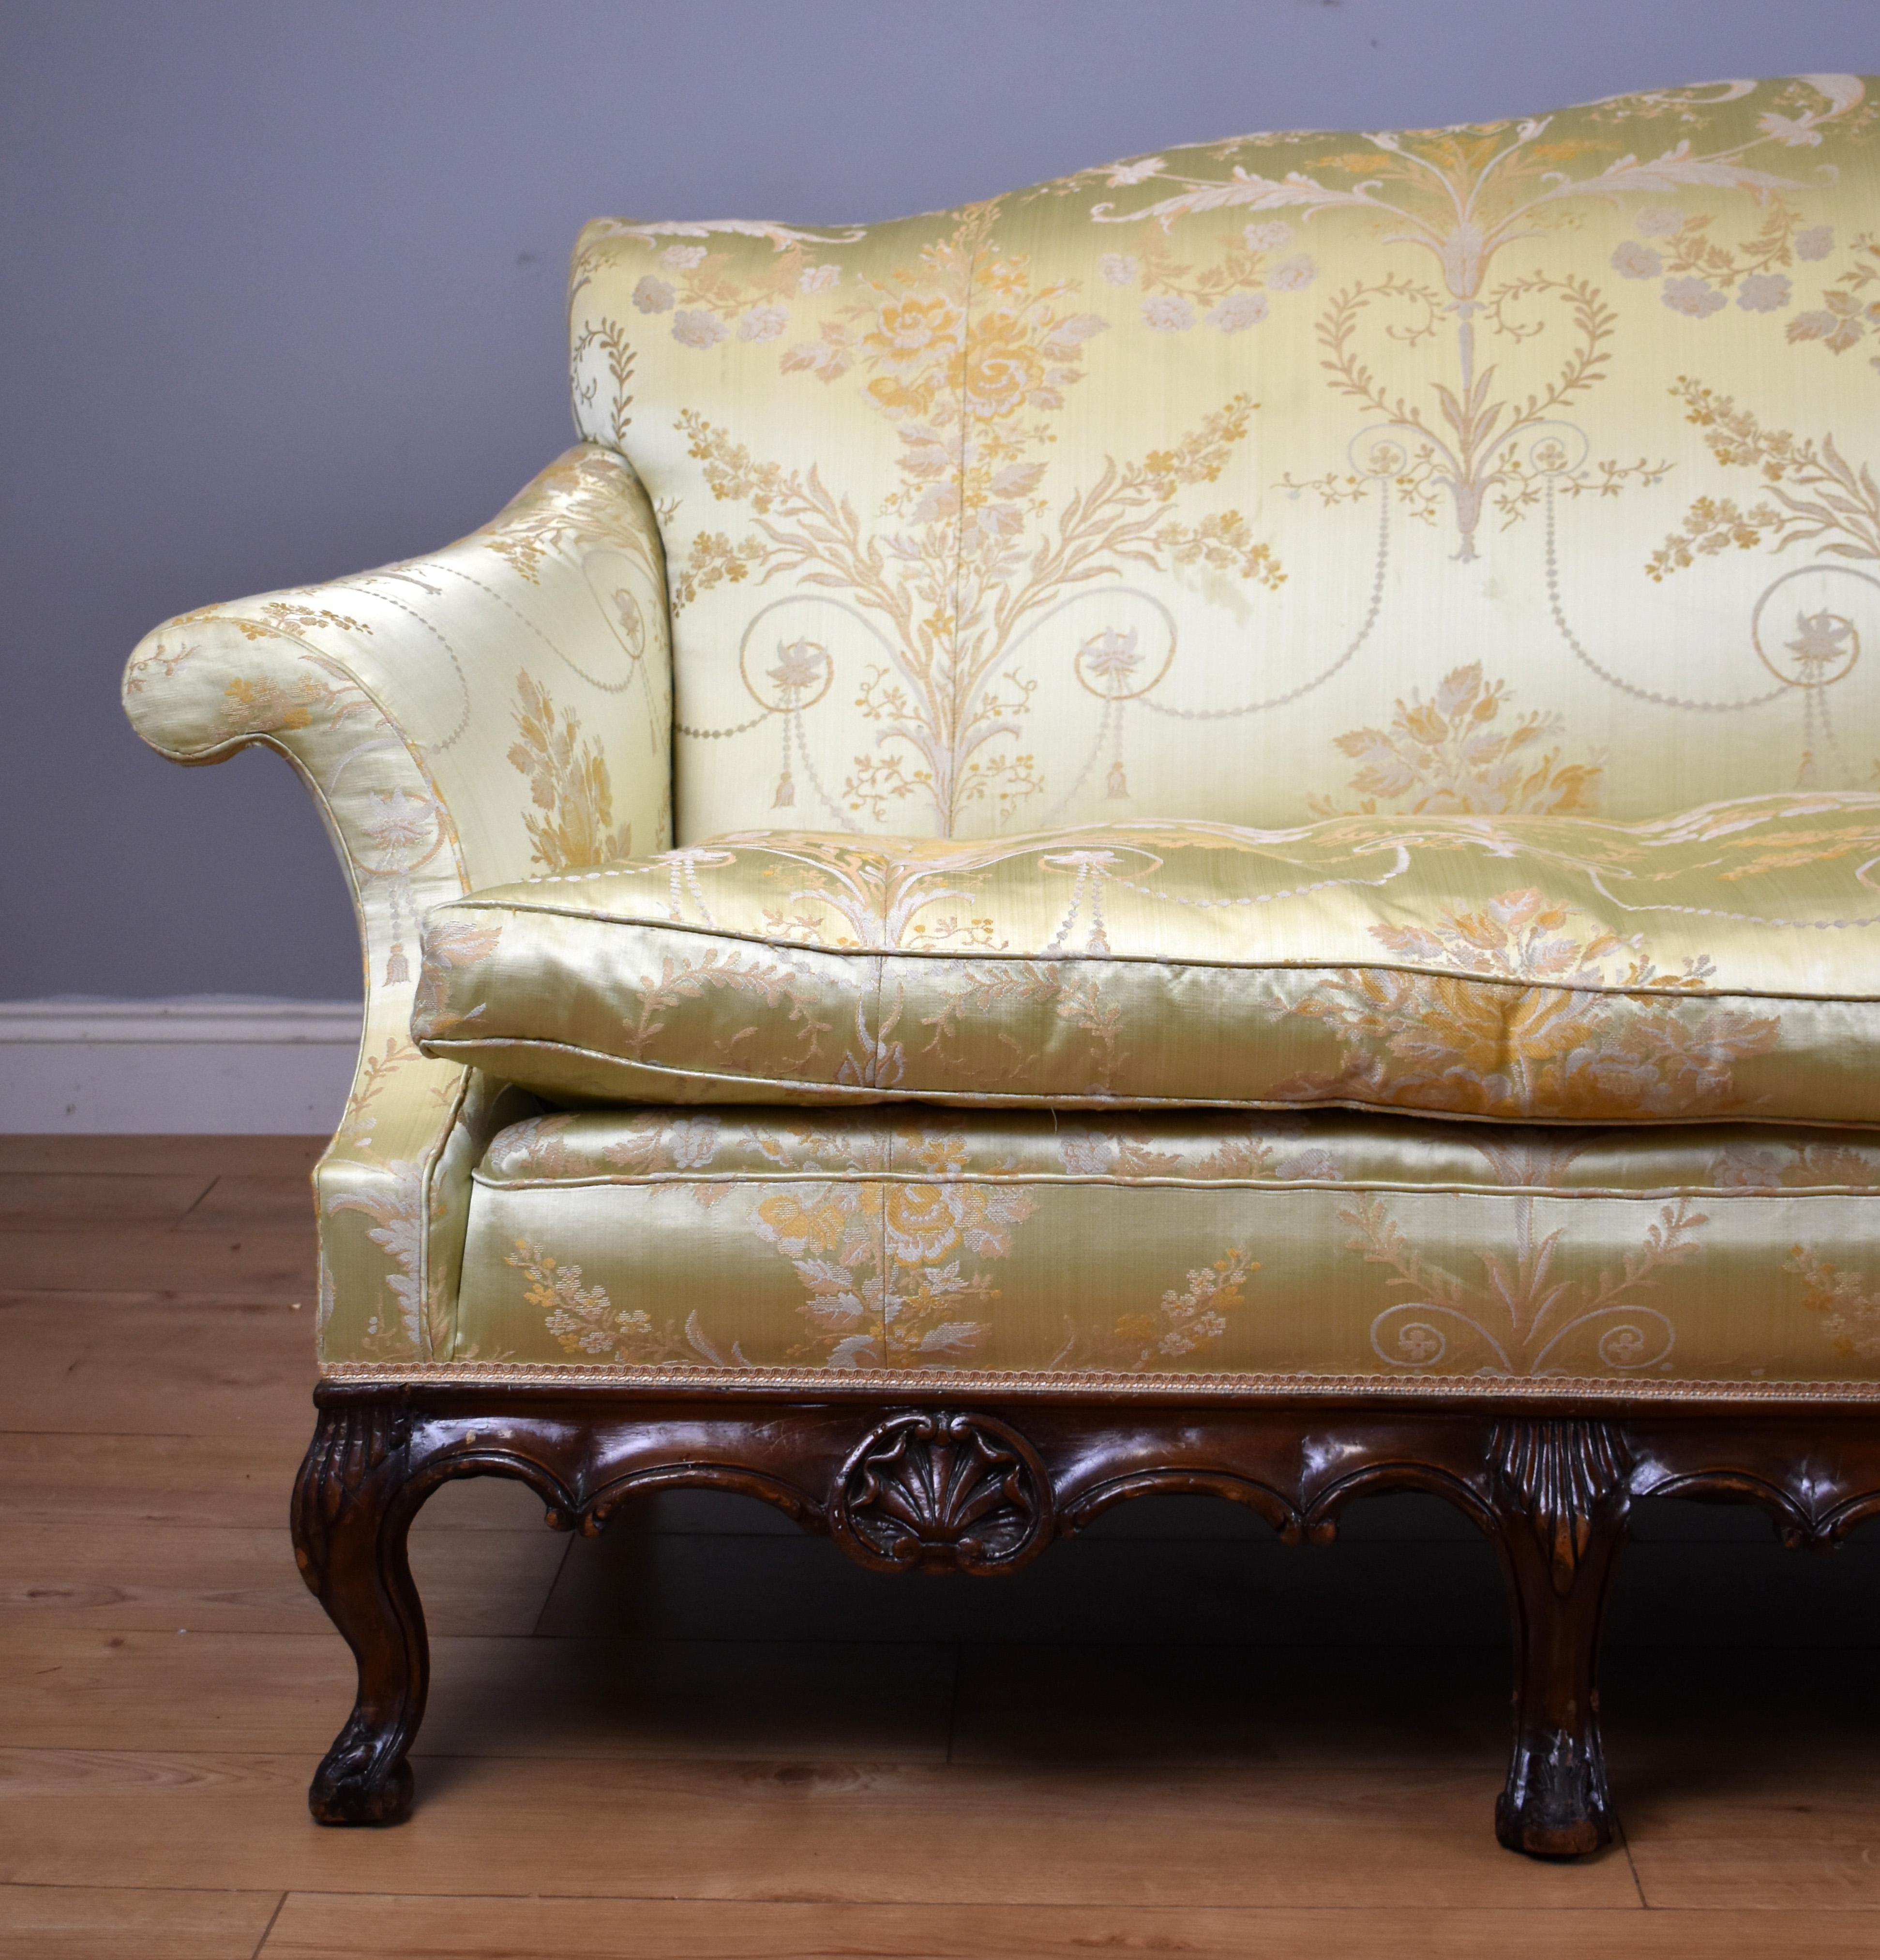 A Queen Anne style sofa, upholstered in pale yellow foliate patterned silk type material, with exposed shell and scroll carved frame raised on four front cabriole legs. The sofa is in good useable, showing minor wear commensurate with age and use.